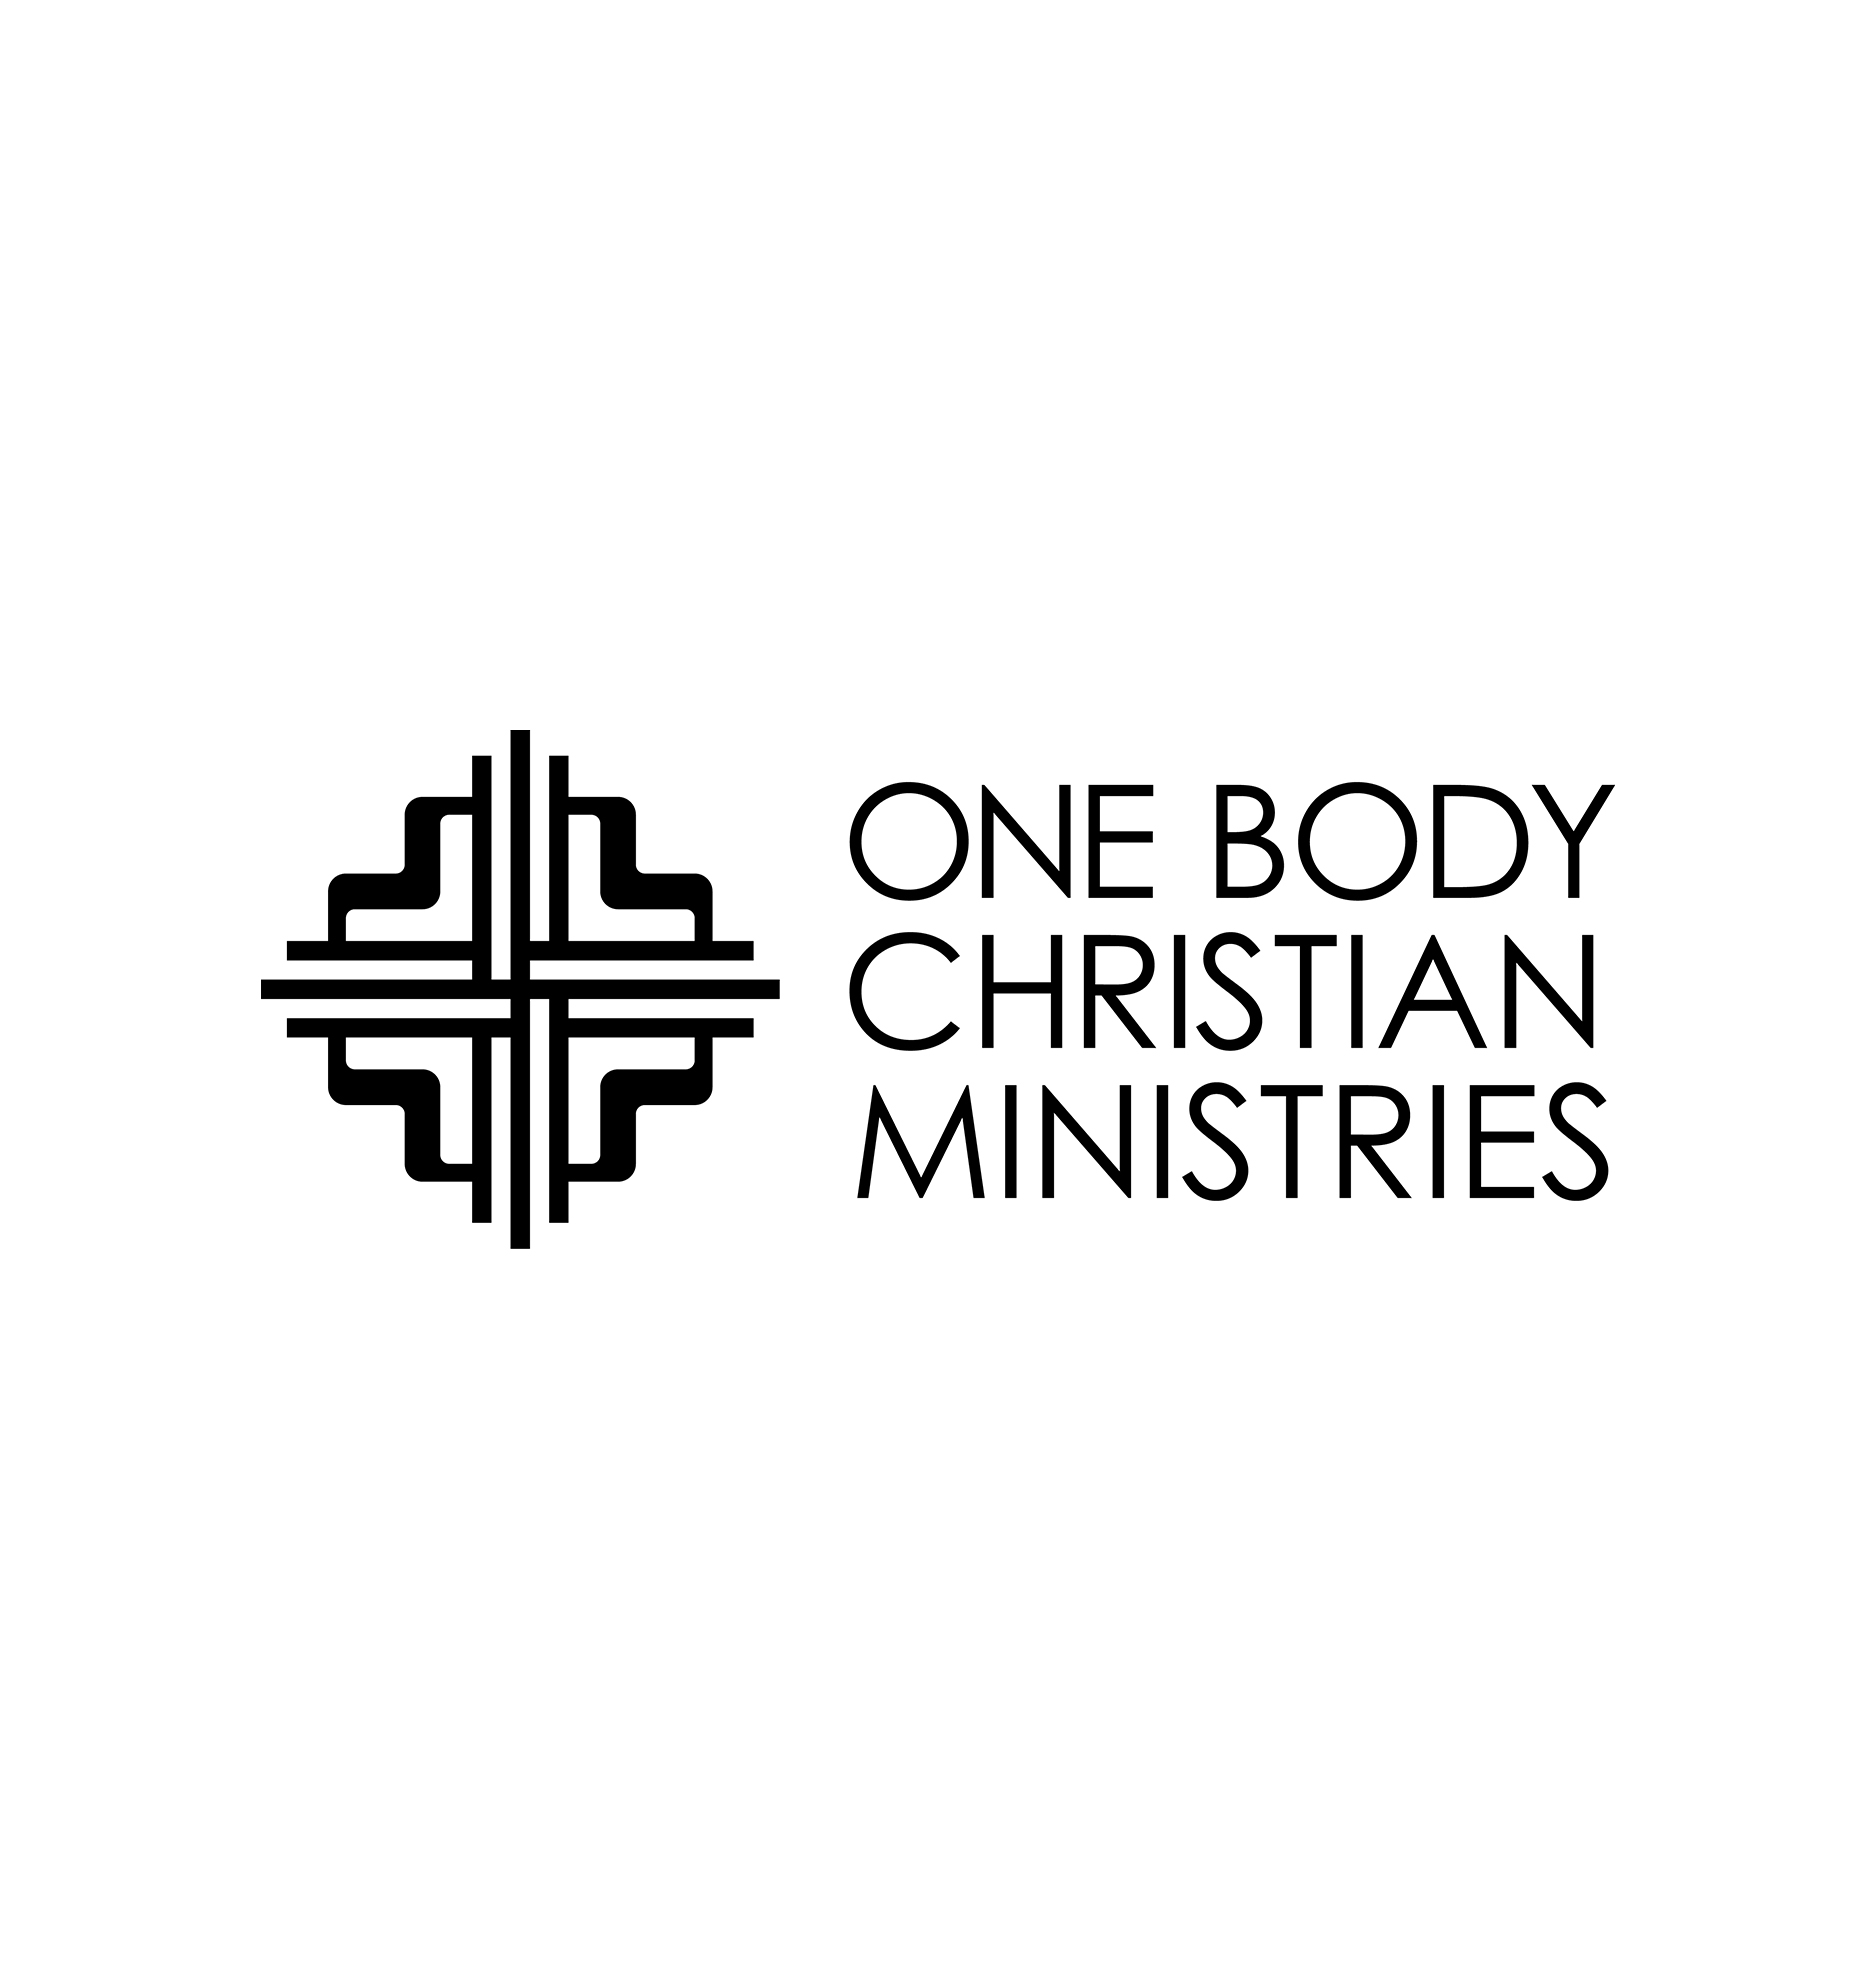 One Body Christian Ministries